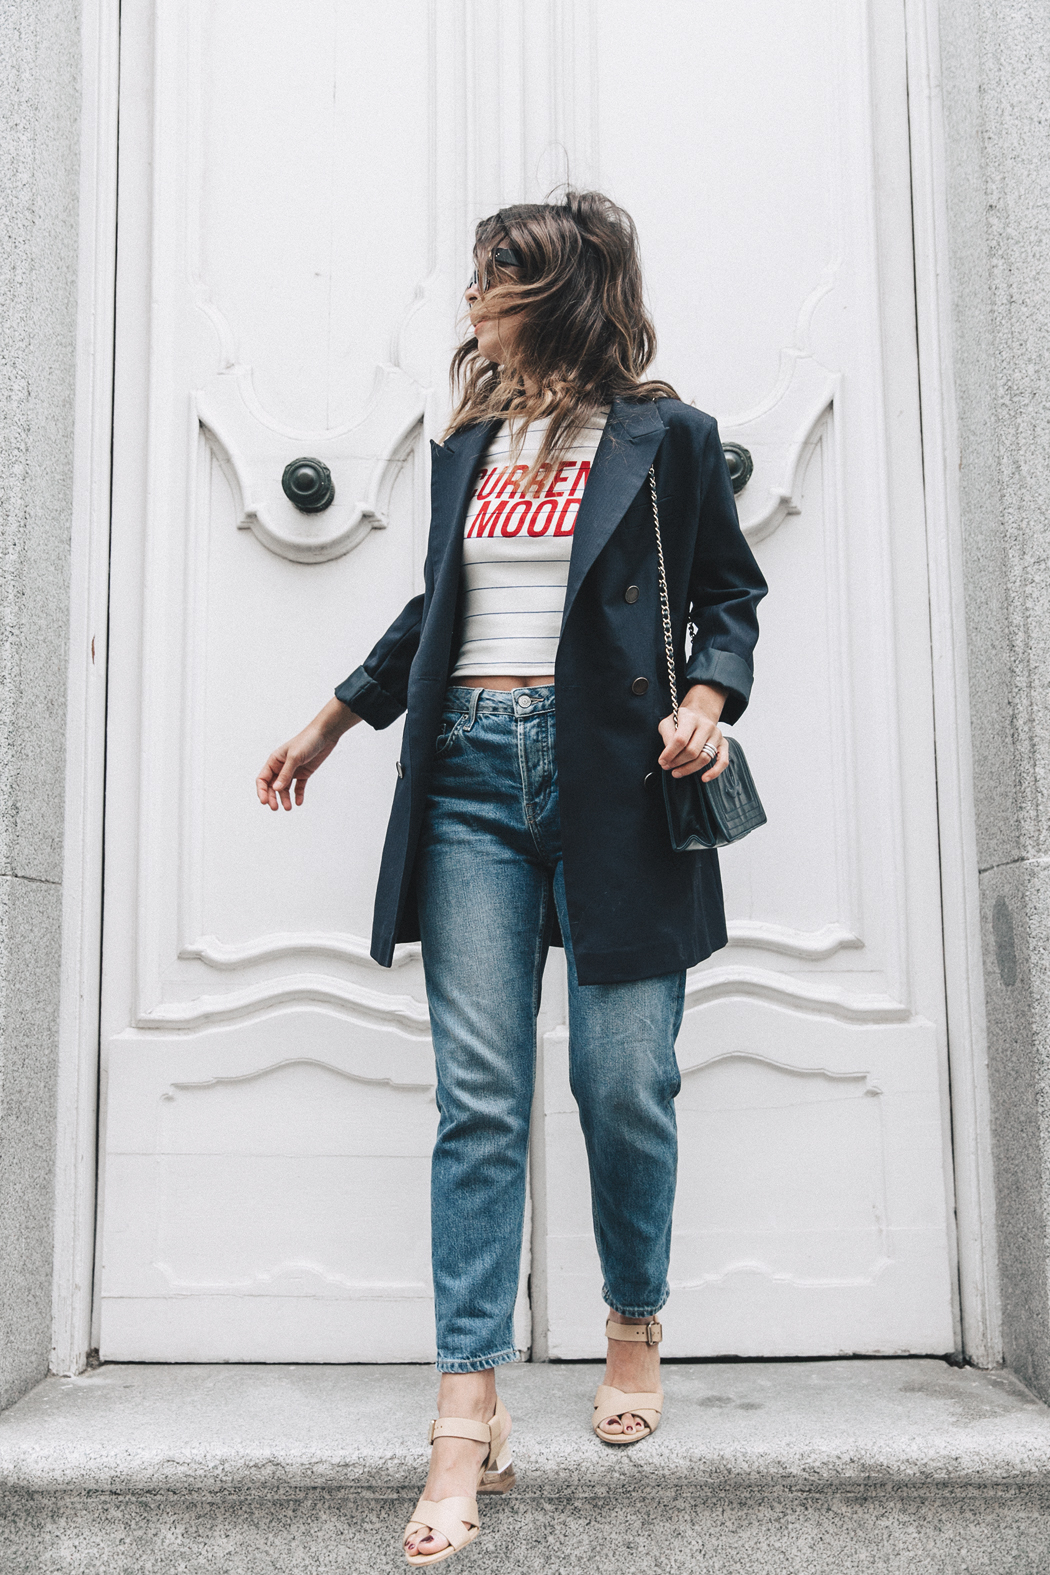 Current_Mood_Striped_Top-Denim_Jeans-Topshop-Dune_Sandals-Outfit-Street_Style-Collage_Vintage-21